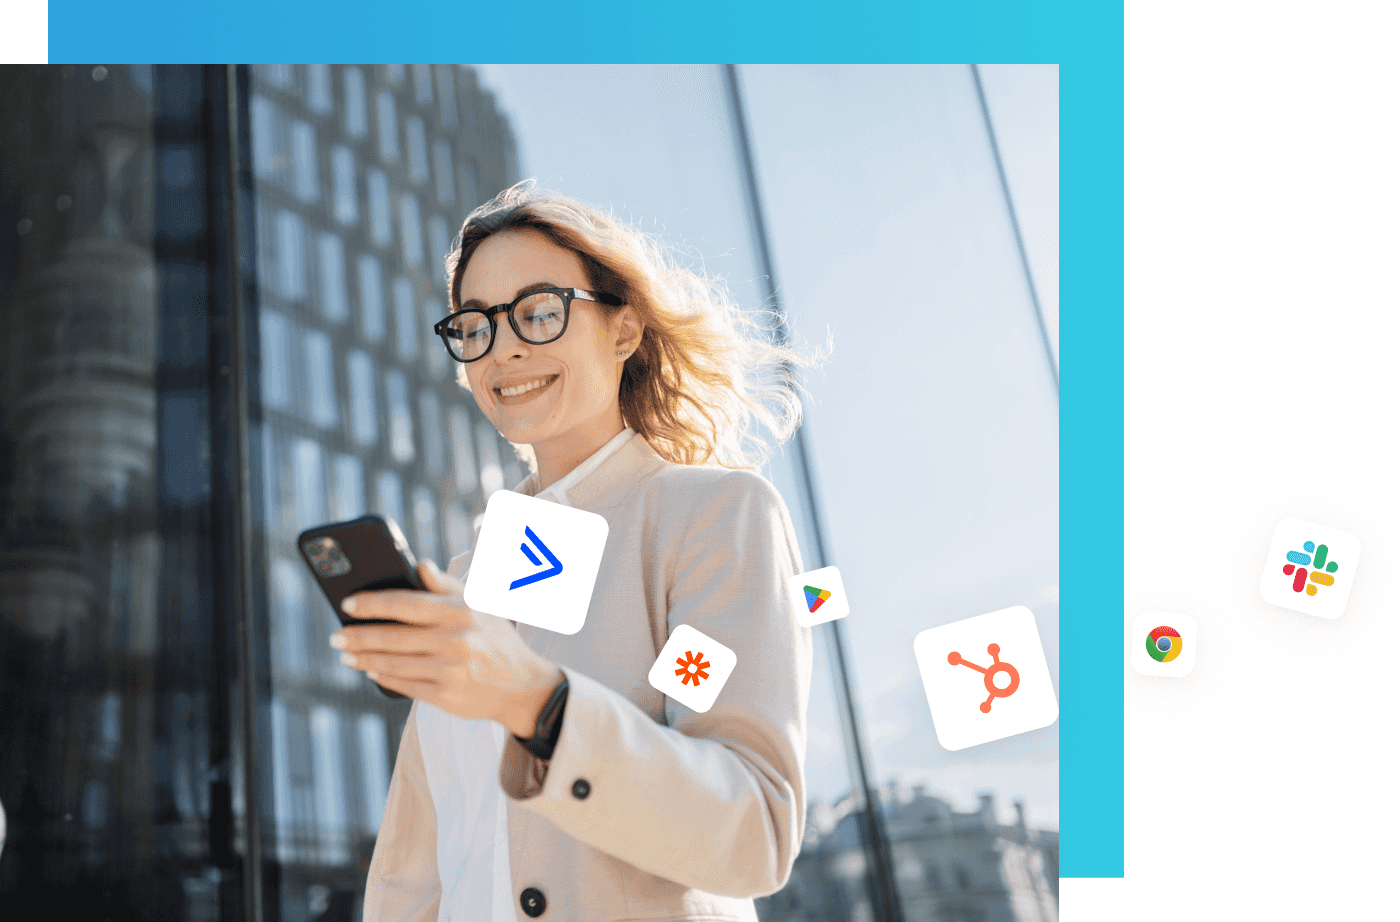 Woman wearing glasses smiling at her phone and flying icons for popular integrations including ActiveCampaign, HubSpot, Hootsuite, Slack, and Google Play.